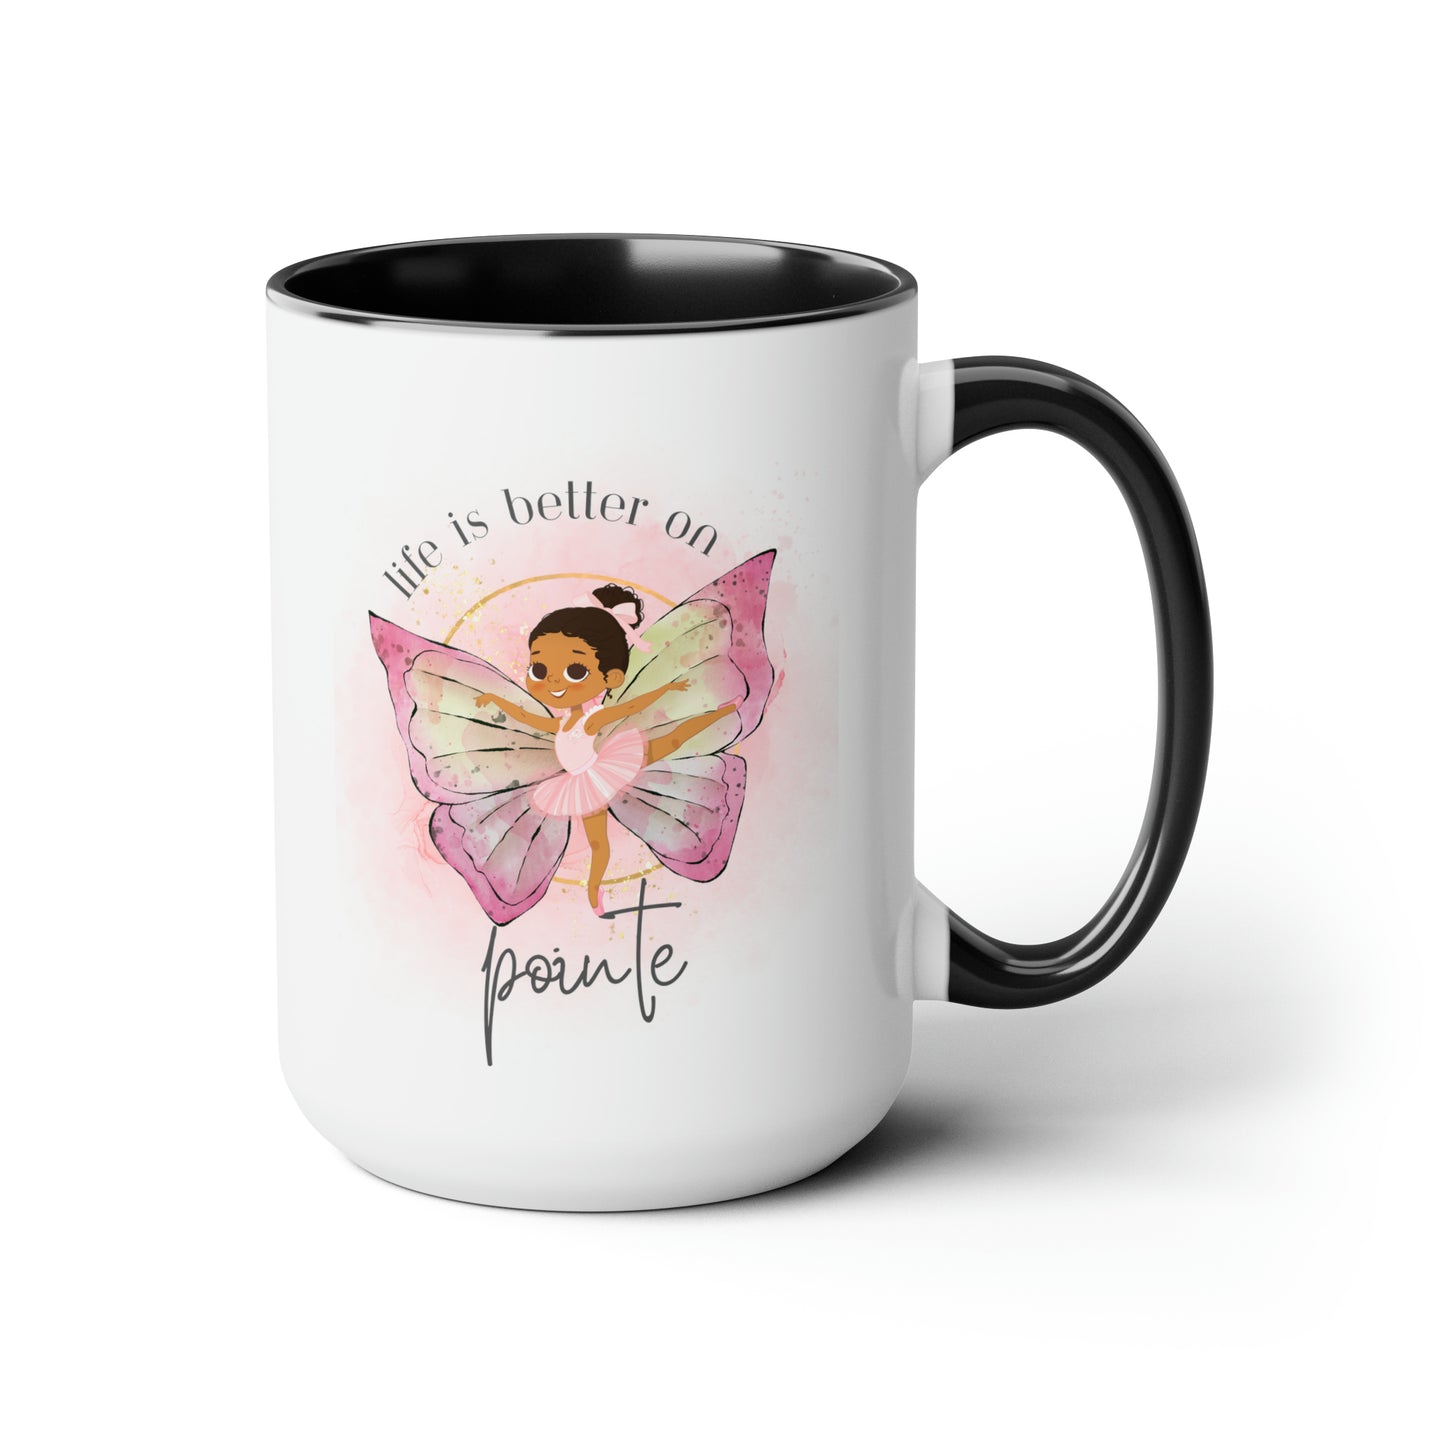 Two-Tone Coffee Mugs - Young Ballerina - Life is better on pointe